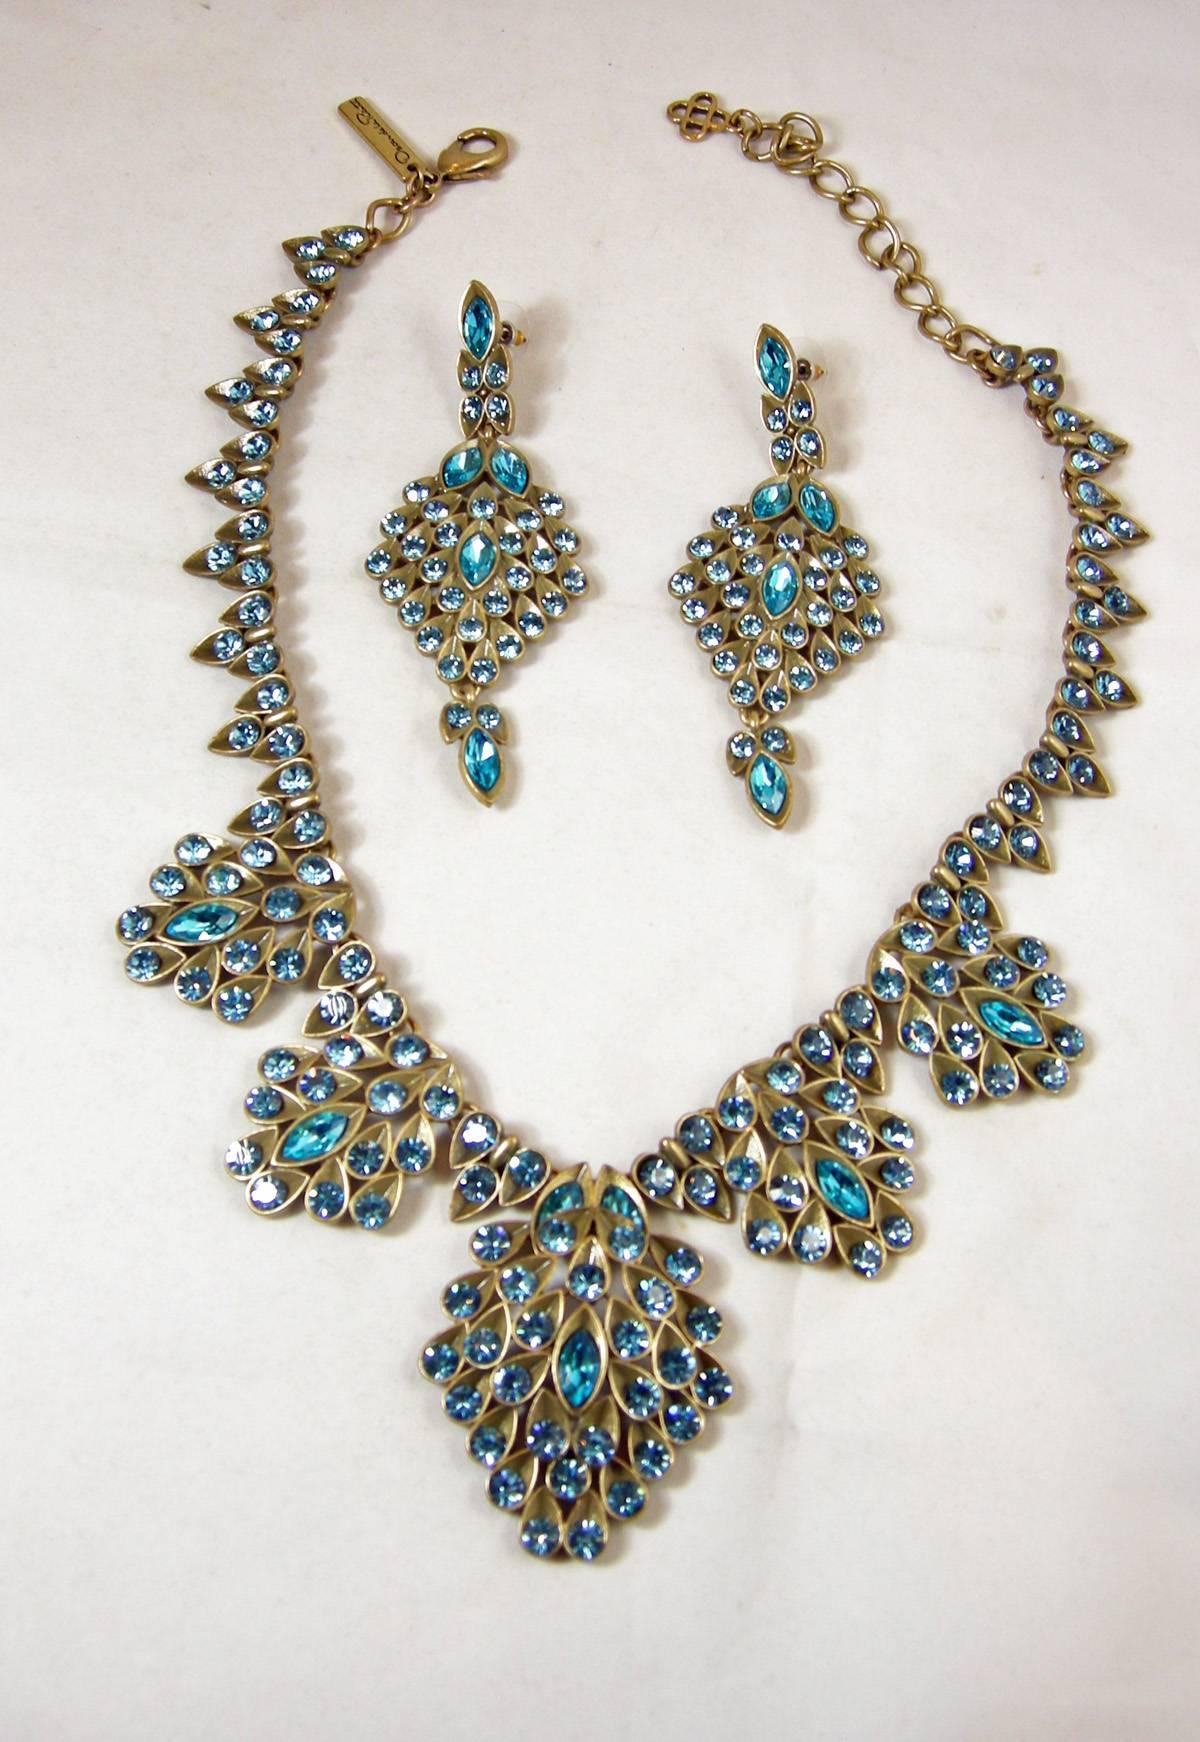 This beautiful Oscar de la Renta set is gorgeous to the eye and even more beautiful on.  It’s created in an antique gold tone finish with the open link chain at the top peacock/aquamarine color teardrops leading downward where there are two larger